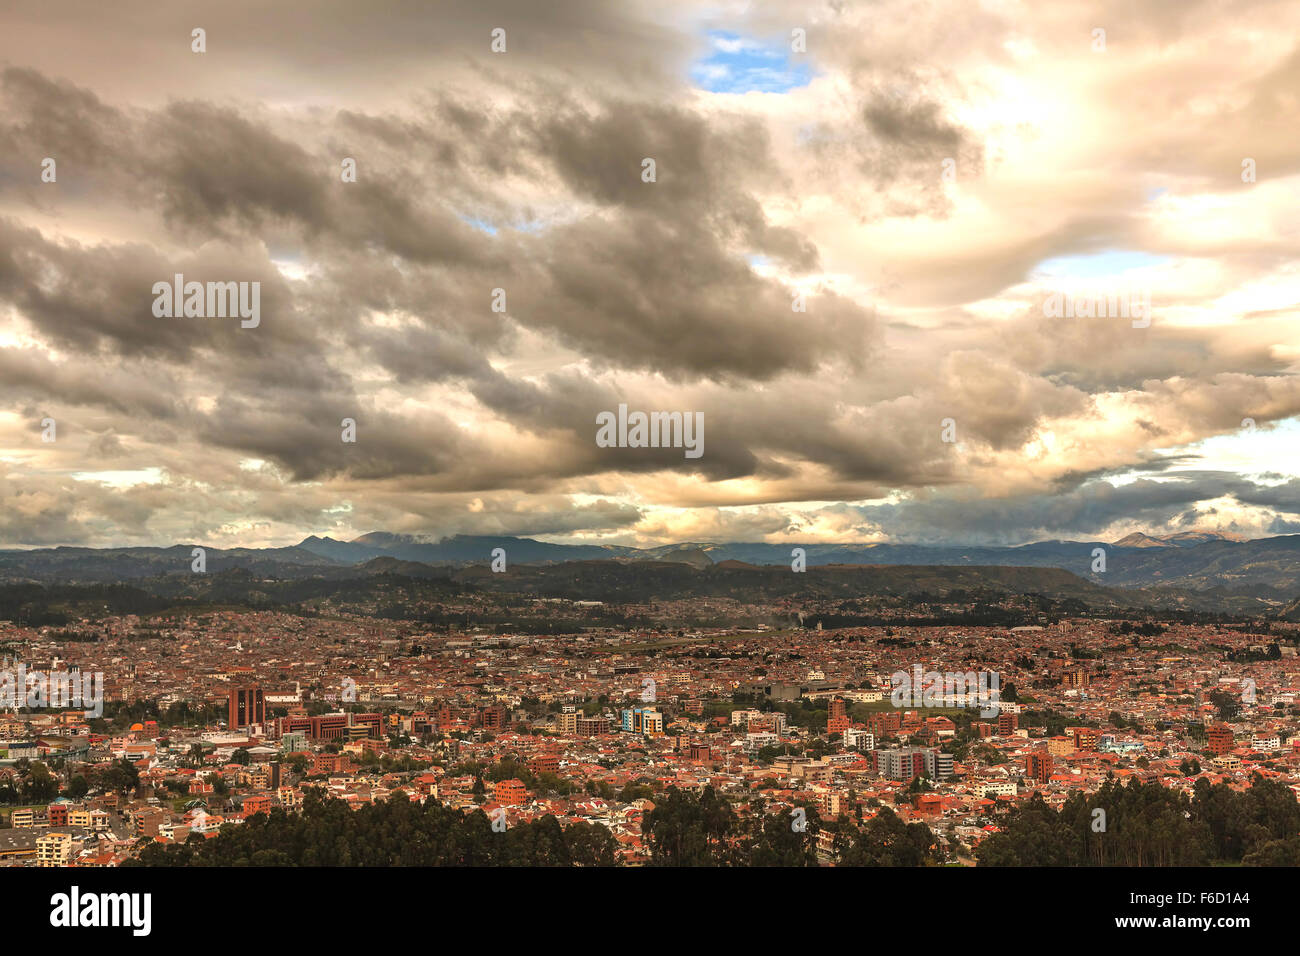 Aerial View Of Cuenca City, Is The Capital Of The Azuay Province, South America Stock Photo